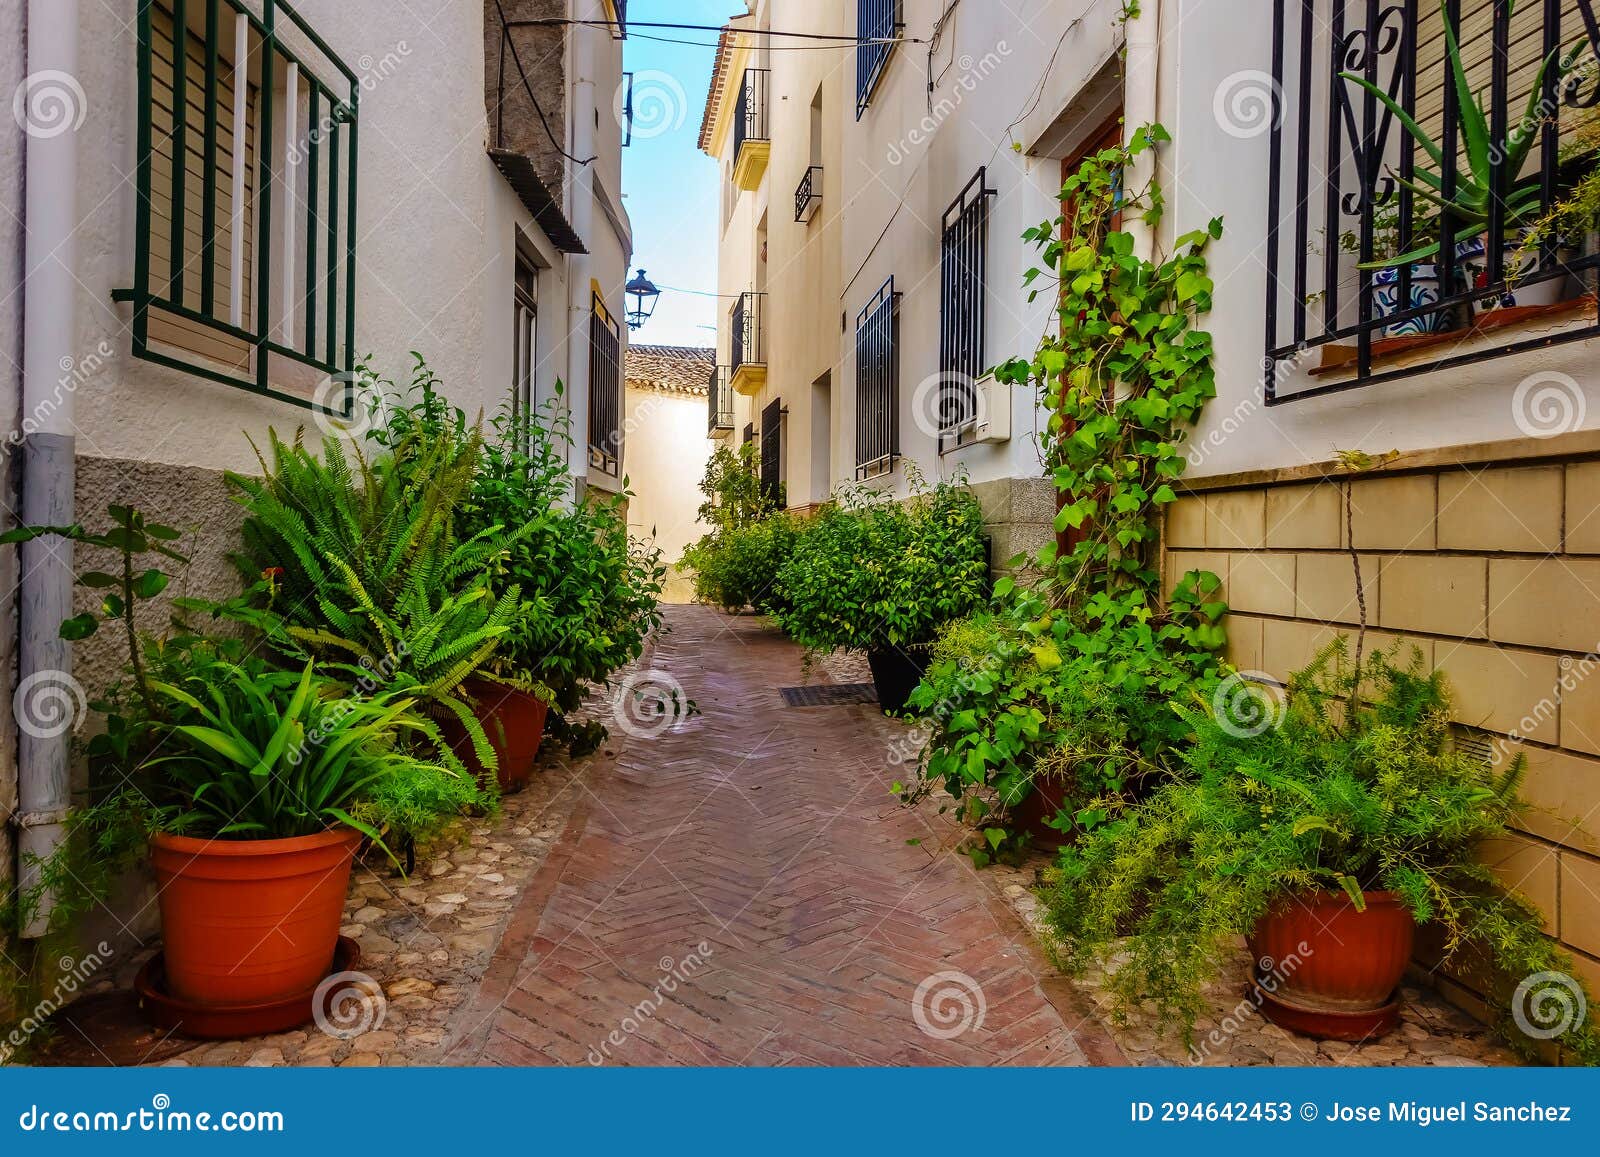 picturesque alley with whitewashed houses and potted plants all over the street, velez rubio, almeria